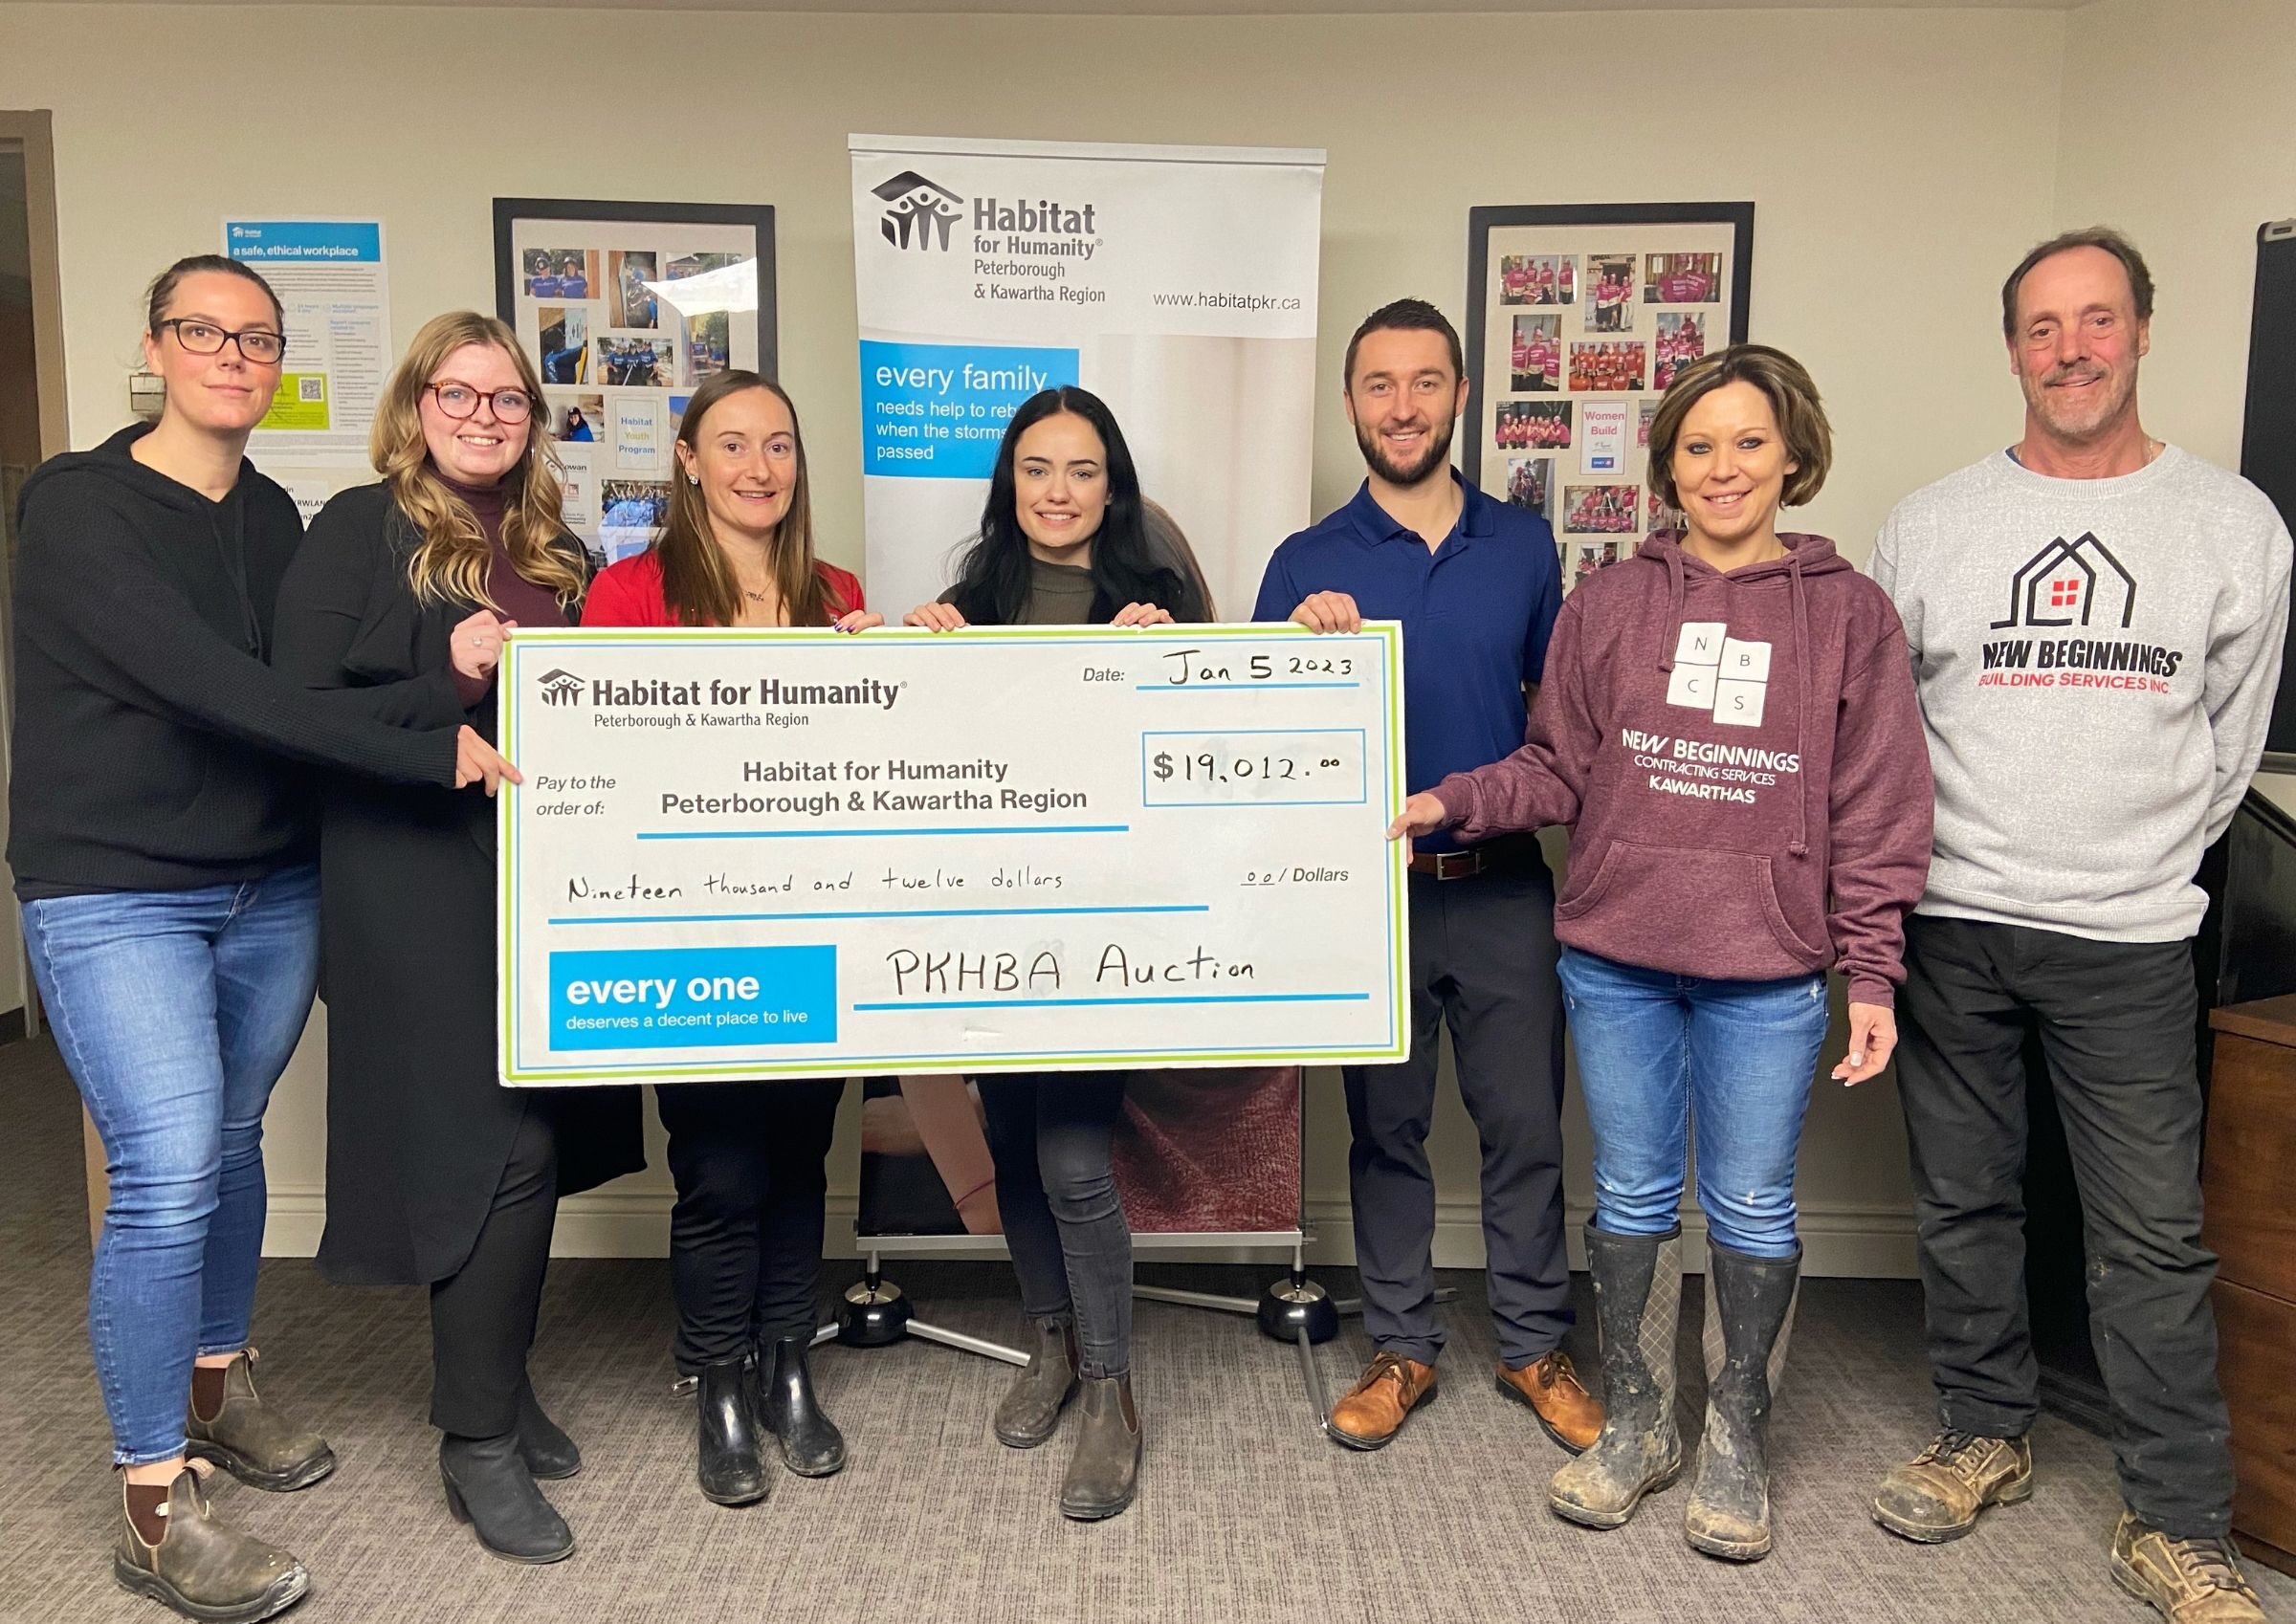 Habitat for Humanity Peterborough & Kawartha Region with representatives from PKHBA and New Beginnings Contracting Services raises over $19,000 from the charity auction